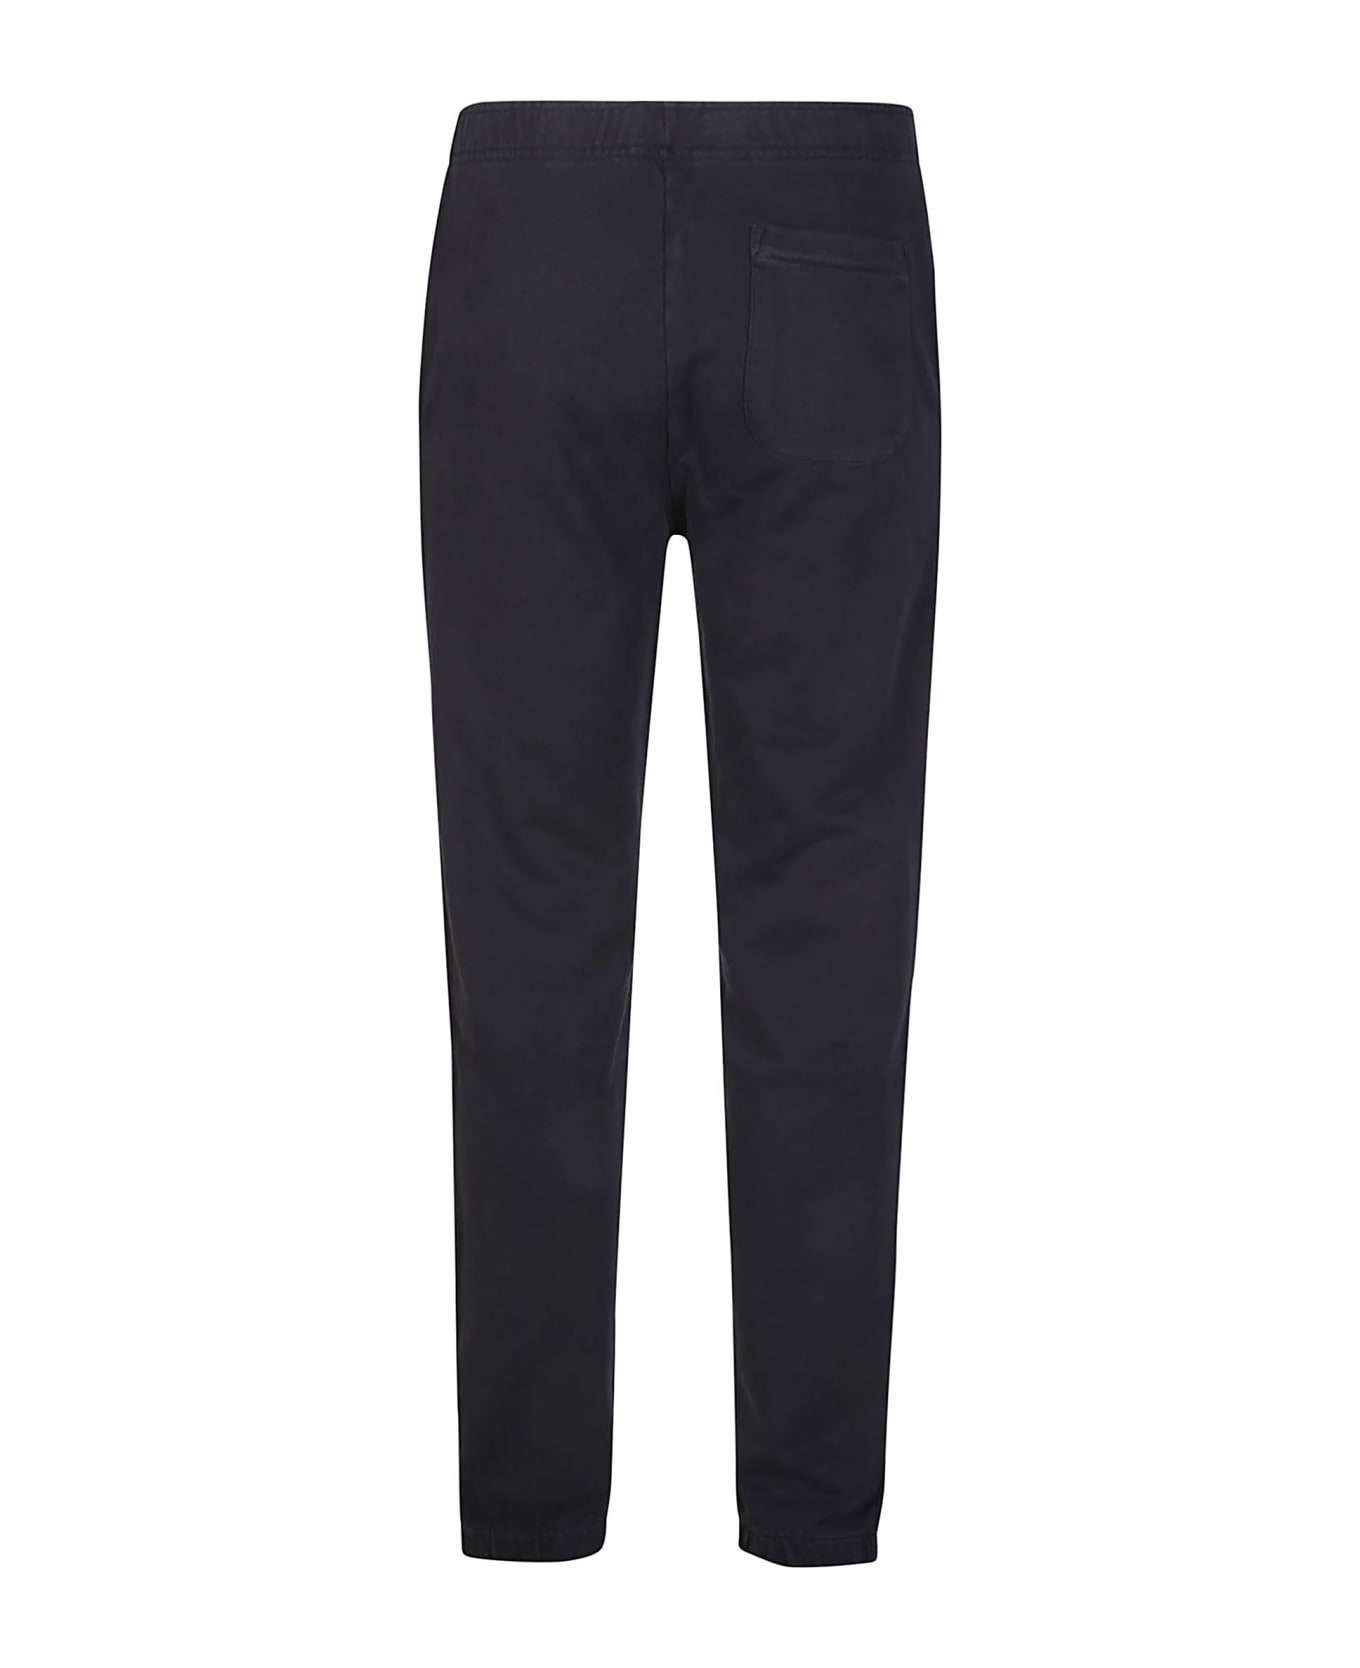 Polo Ralph Lauren Terry Athletic Pant - Faded Black